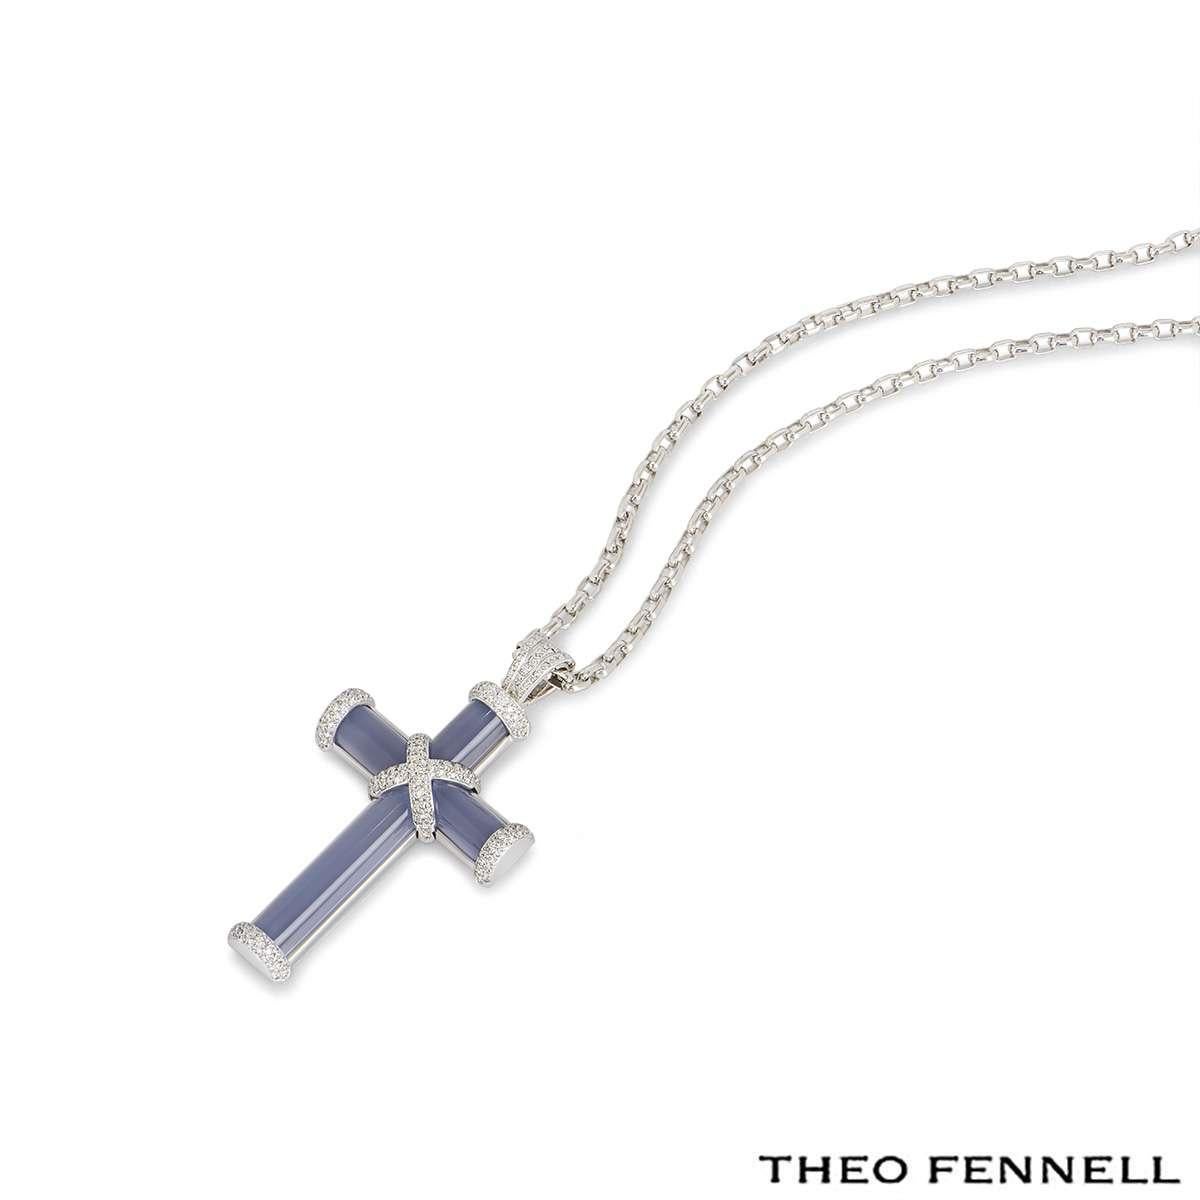 theo fennell gold cross